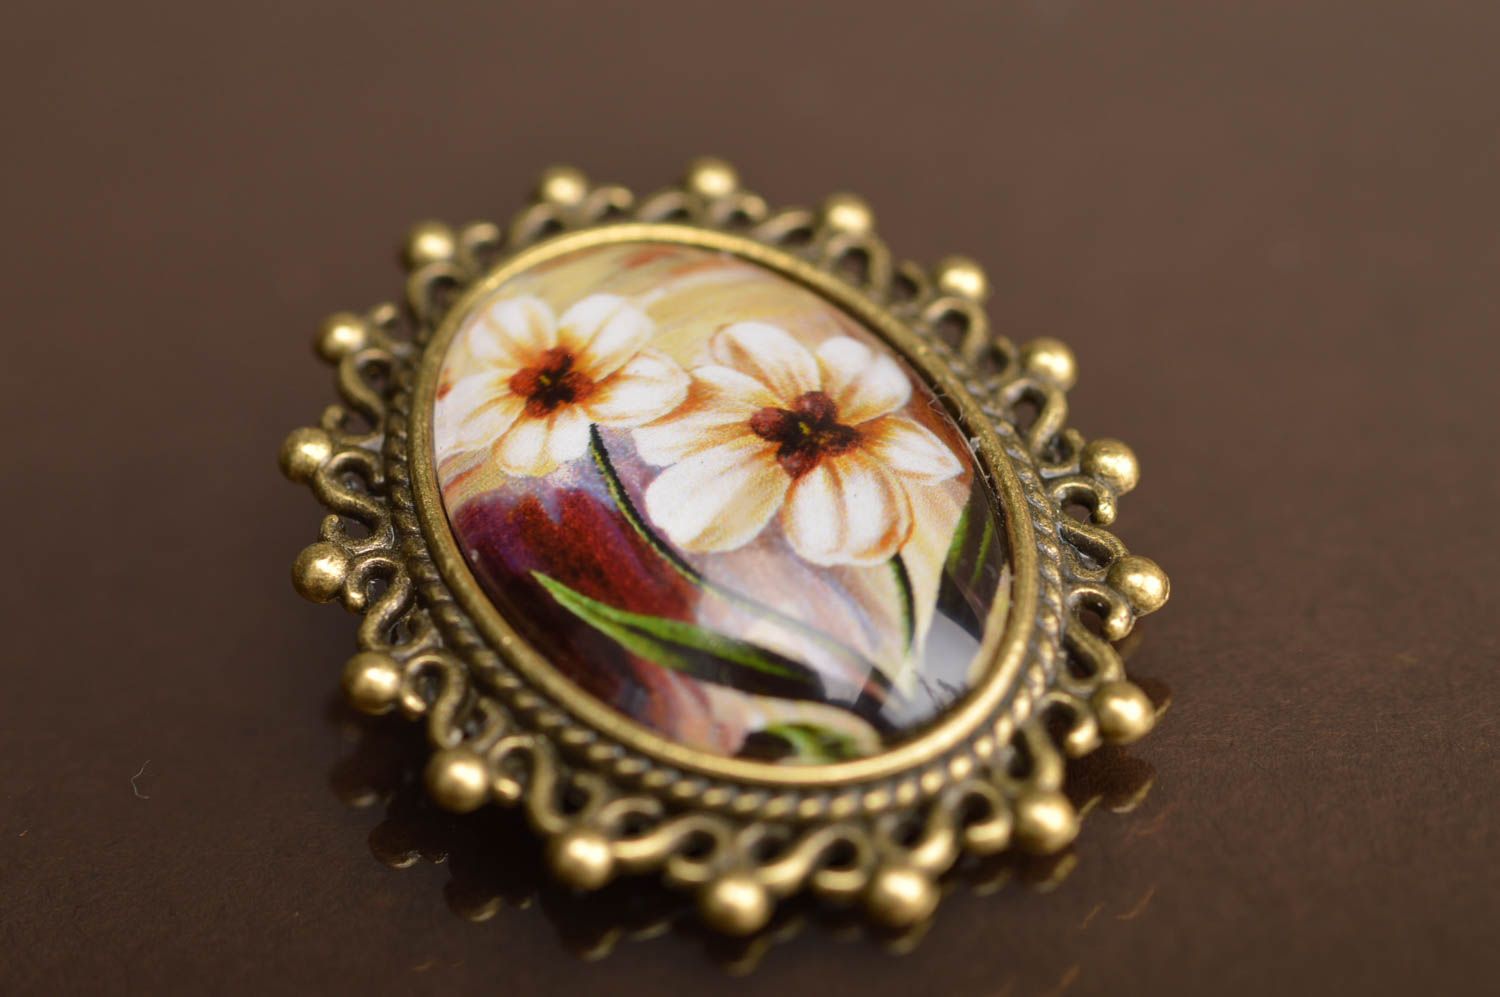 Handmade beautiful oval brooch in vintage style with flowers in dark shades photo 5